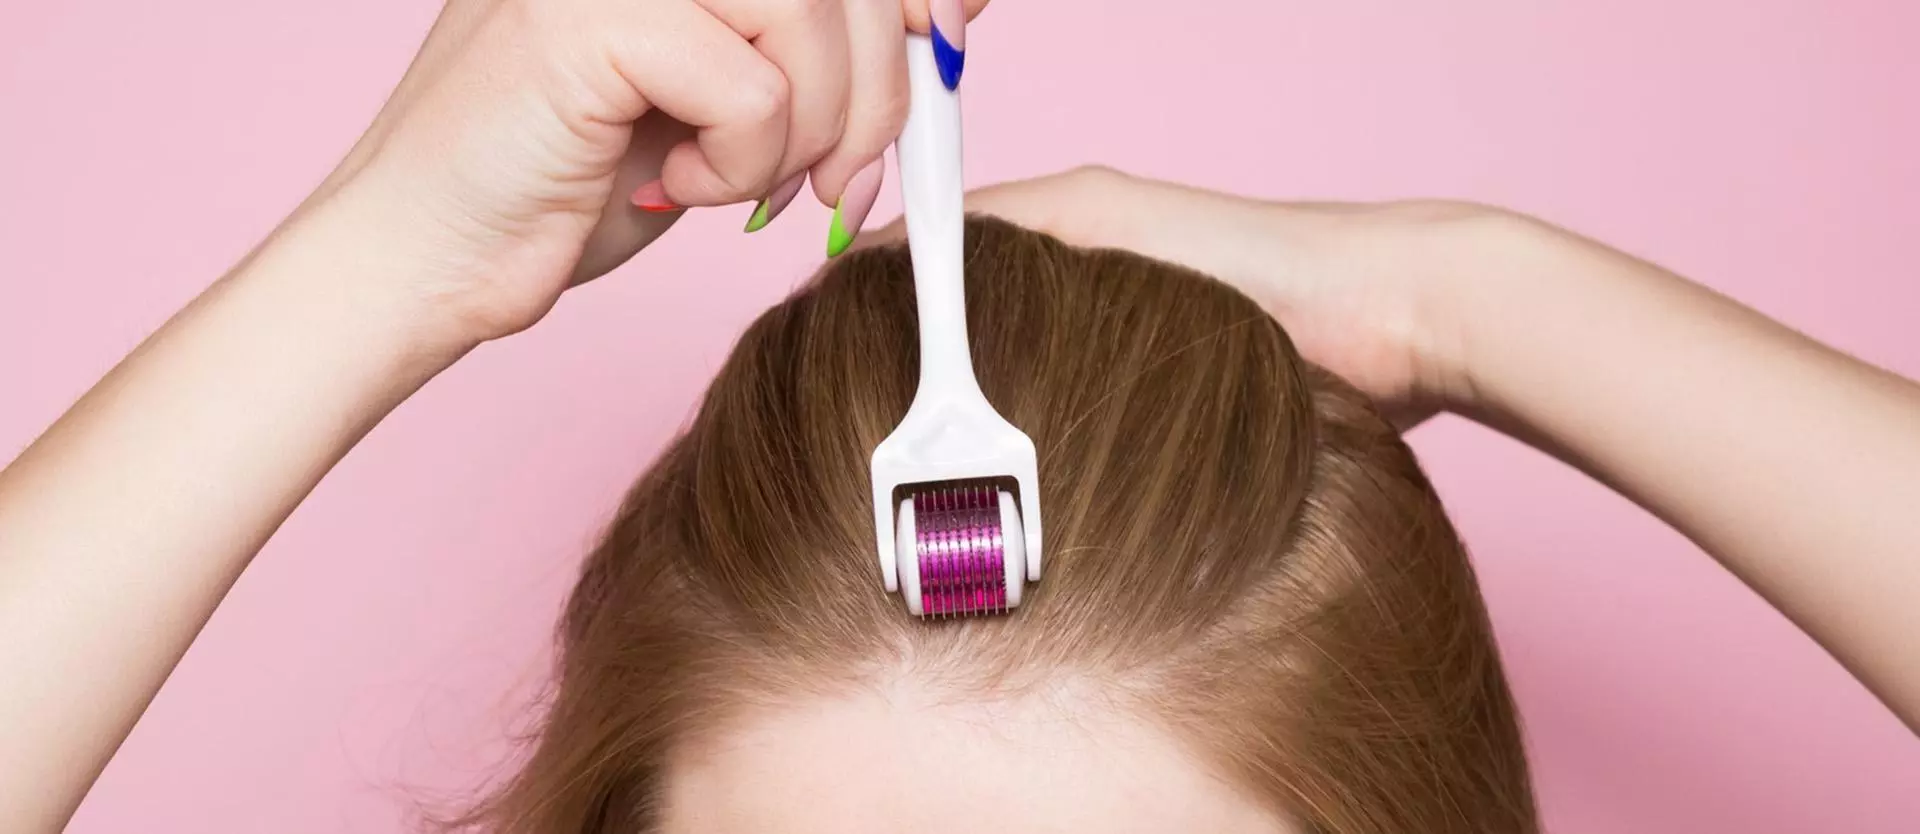 The Pros and Cons of Using Derma Rollers for Hair Growth